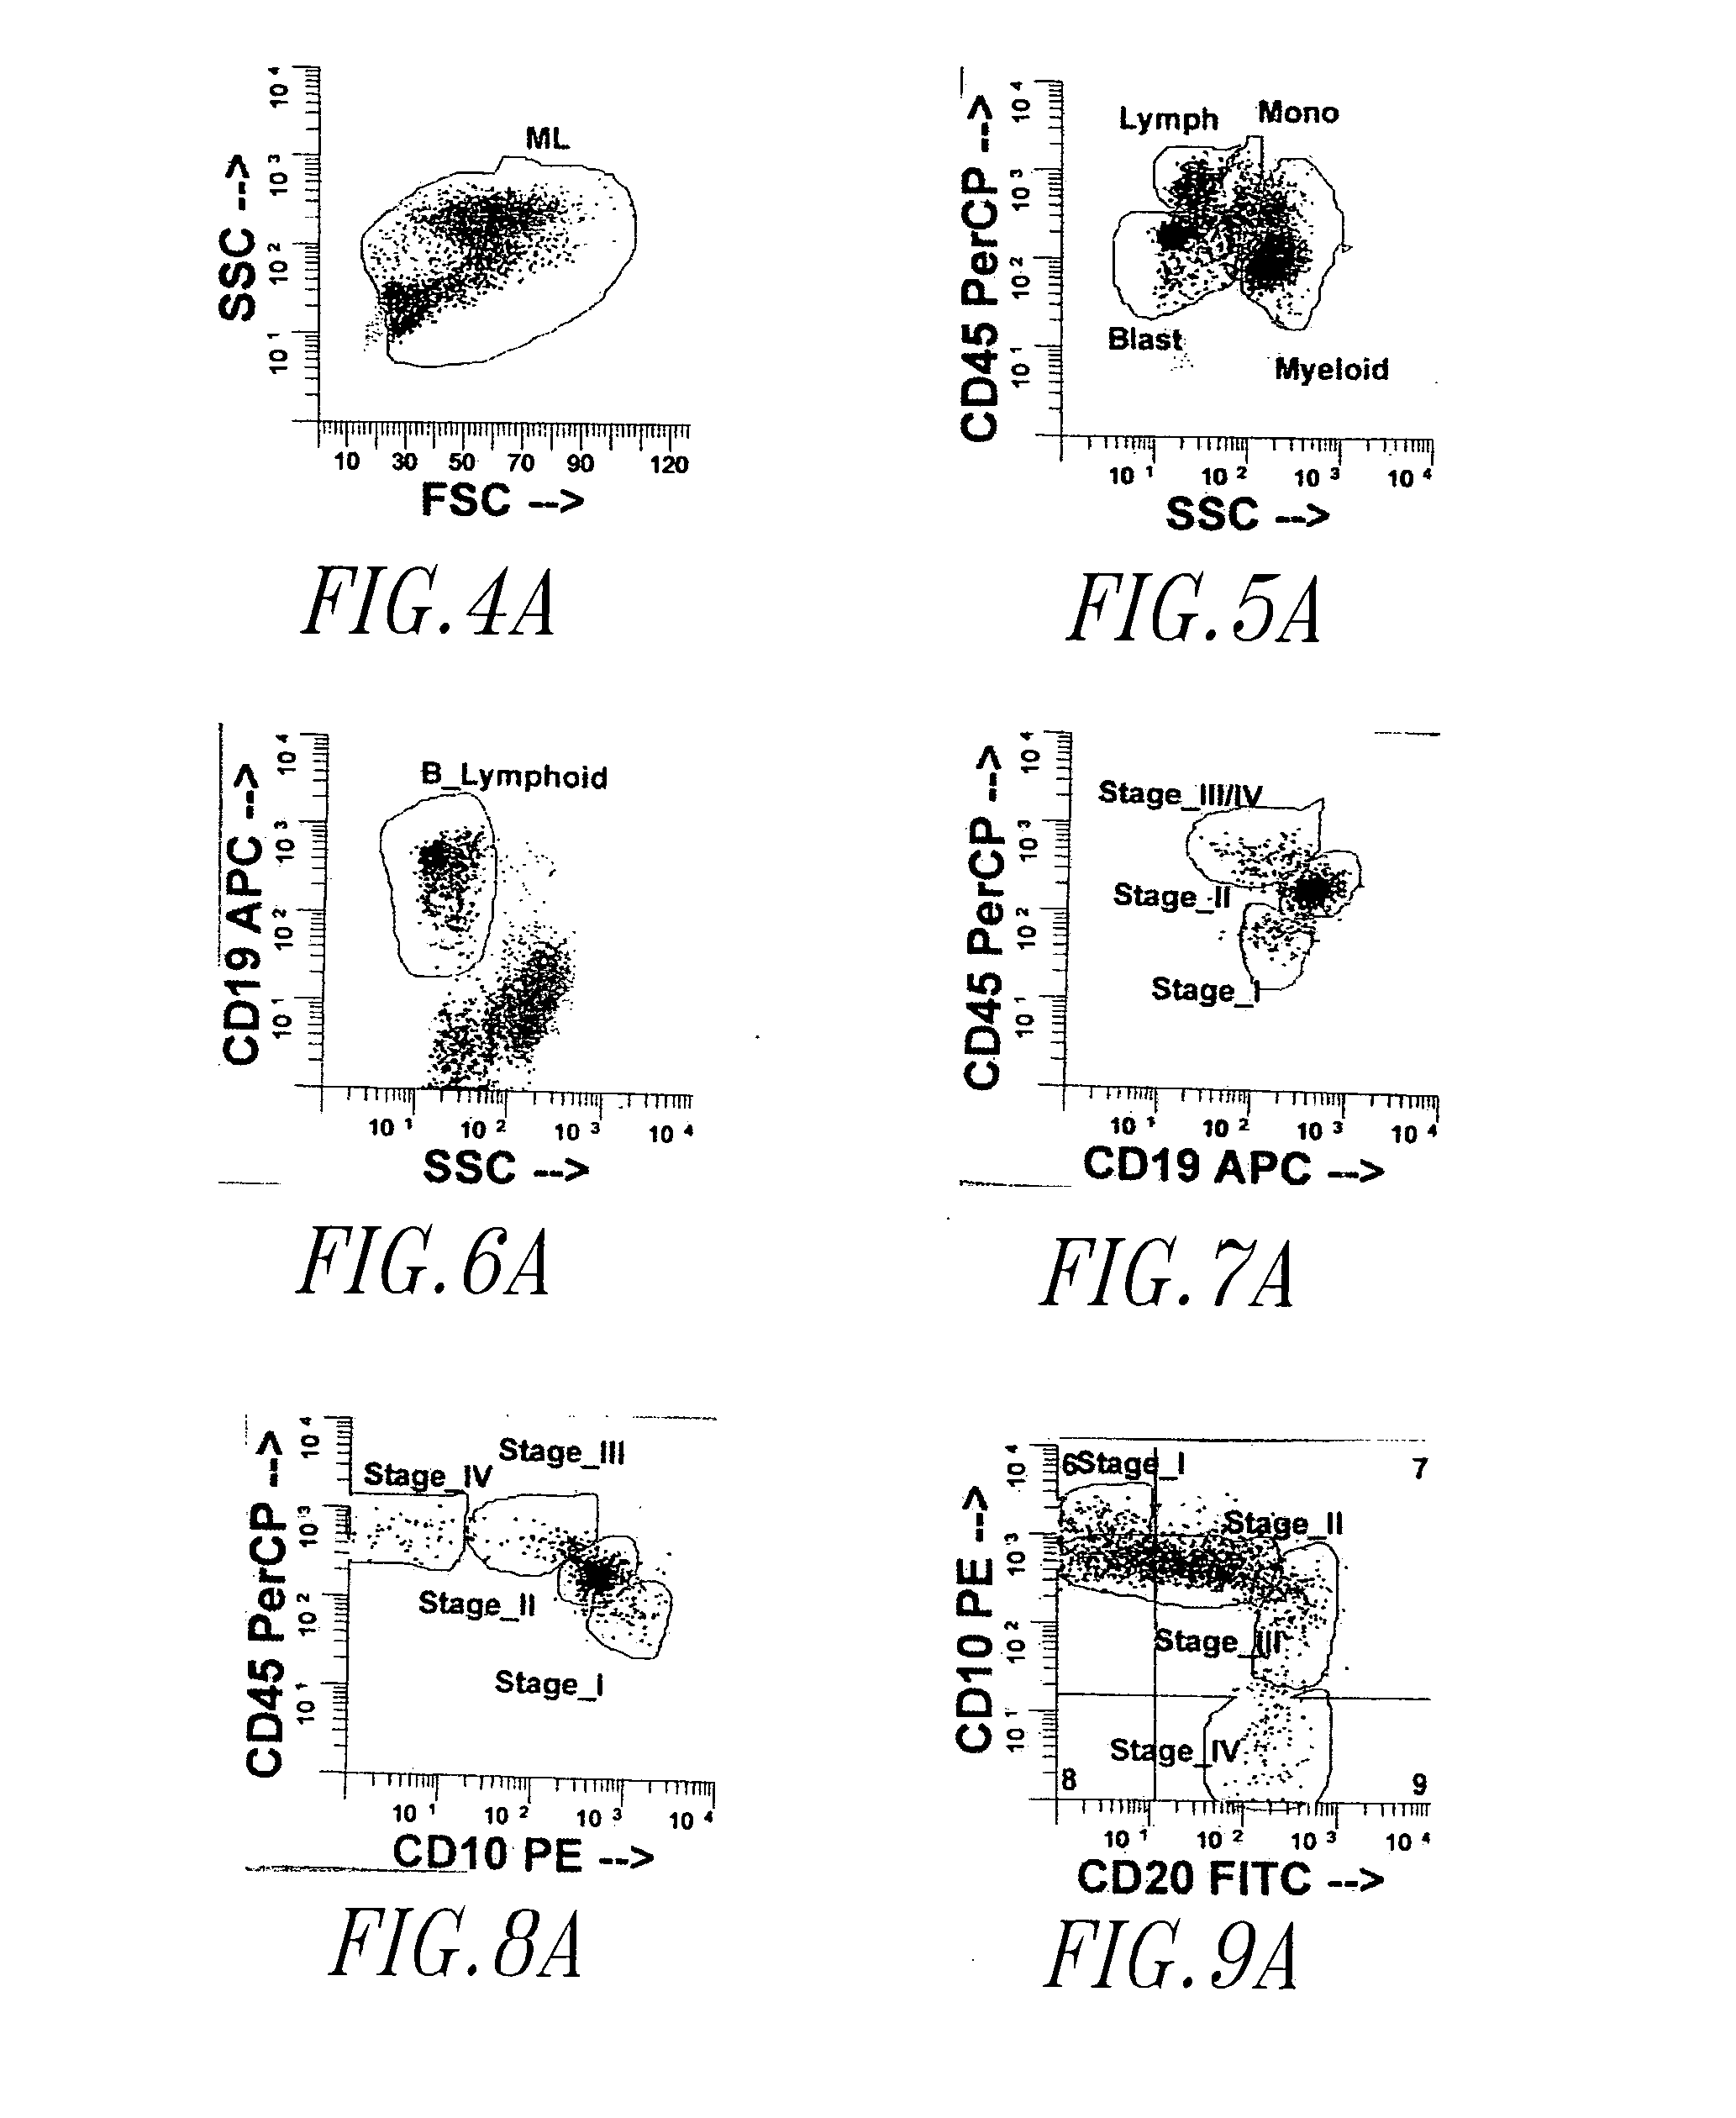 System, method, and article for detecting abnormal cells using multi-dimensional analysis